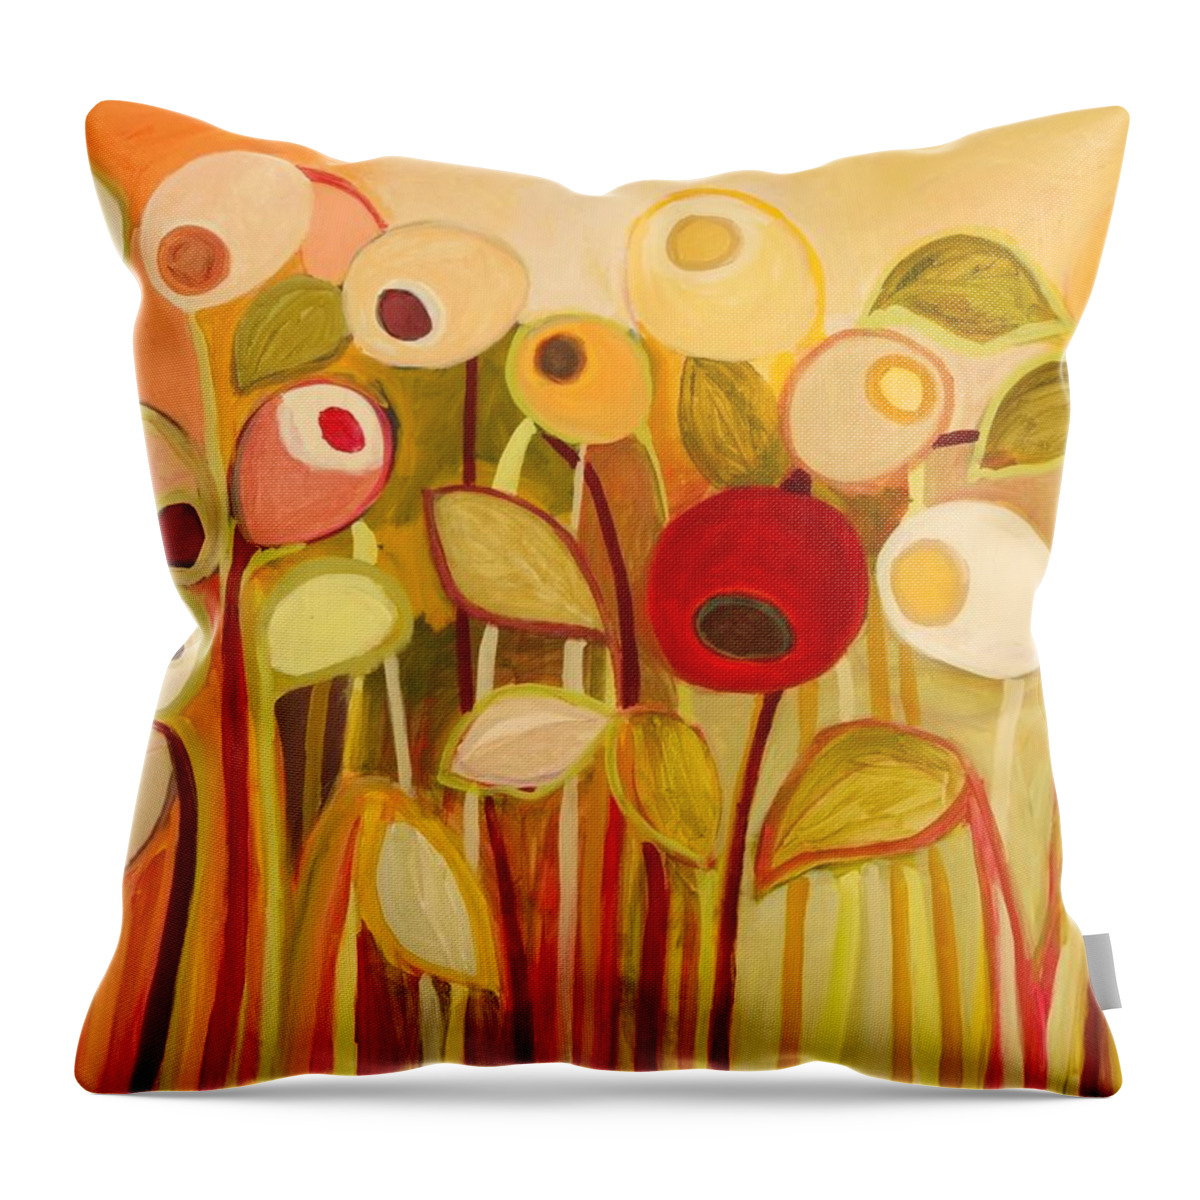 Floral Throw Pillow featuring the painting One Red Posie by Jennifer Lommers